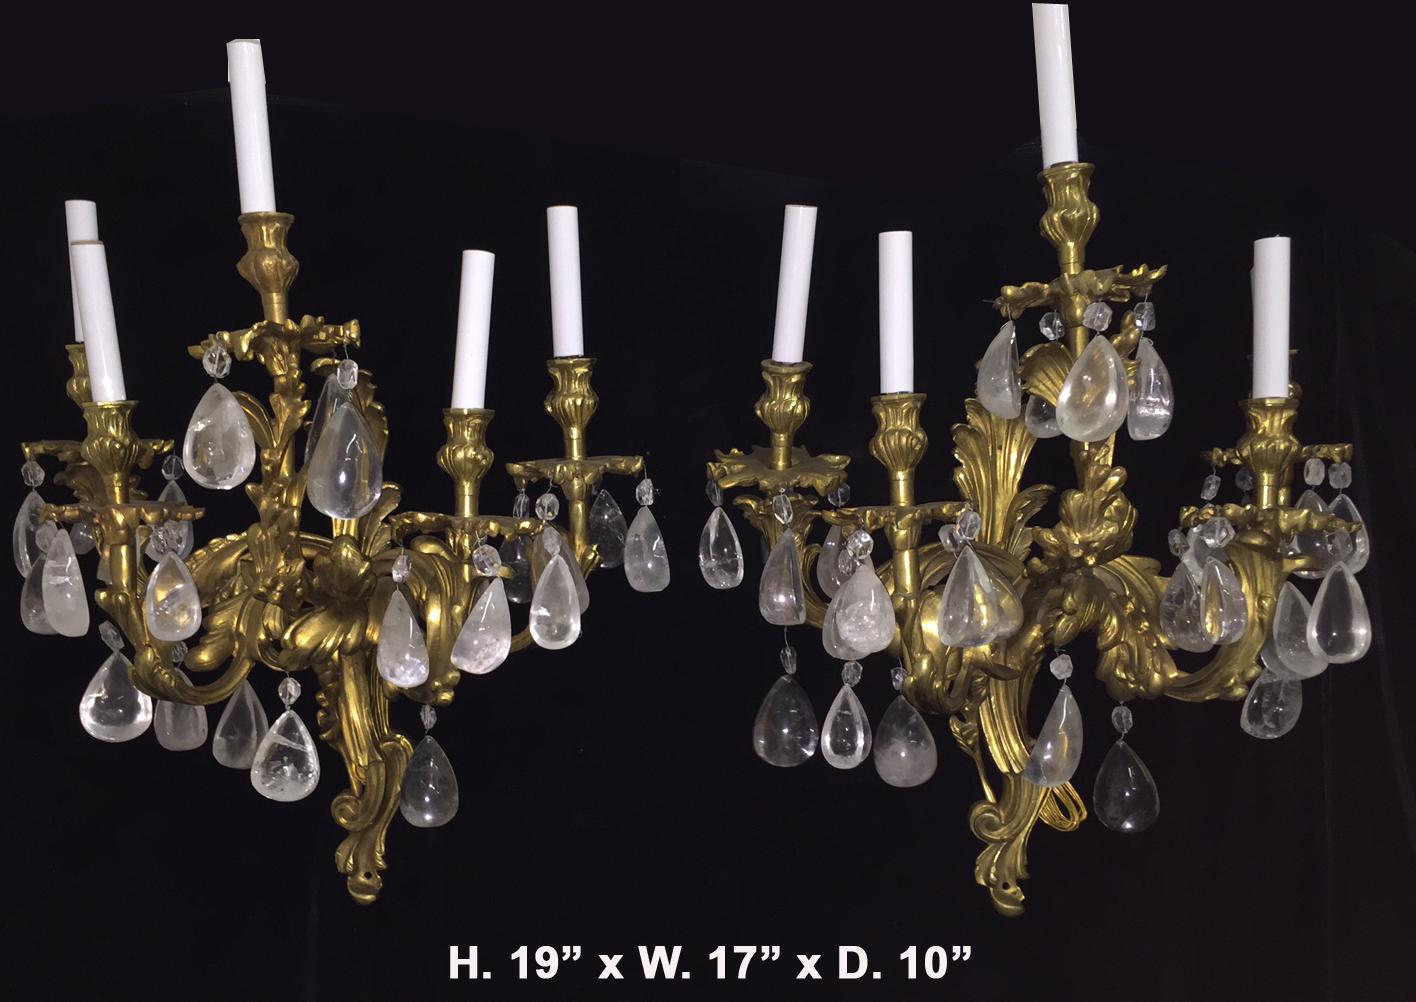 Lovely pair of French Louis XV style hand-carved and hand-polished rock crystal five light gilt bronze sconces,
late 20th century.
Each sconce is centered by a gilt bronze scrolling acanthus backplate, issuing foliate-inspired arms with conforming